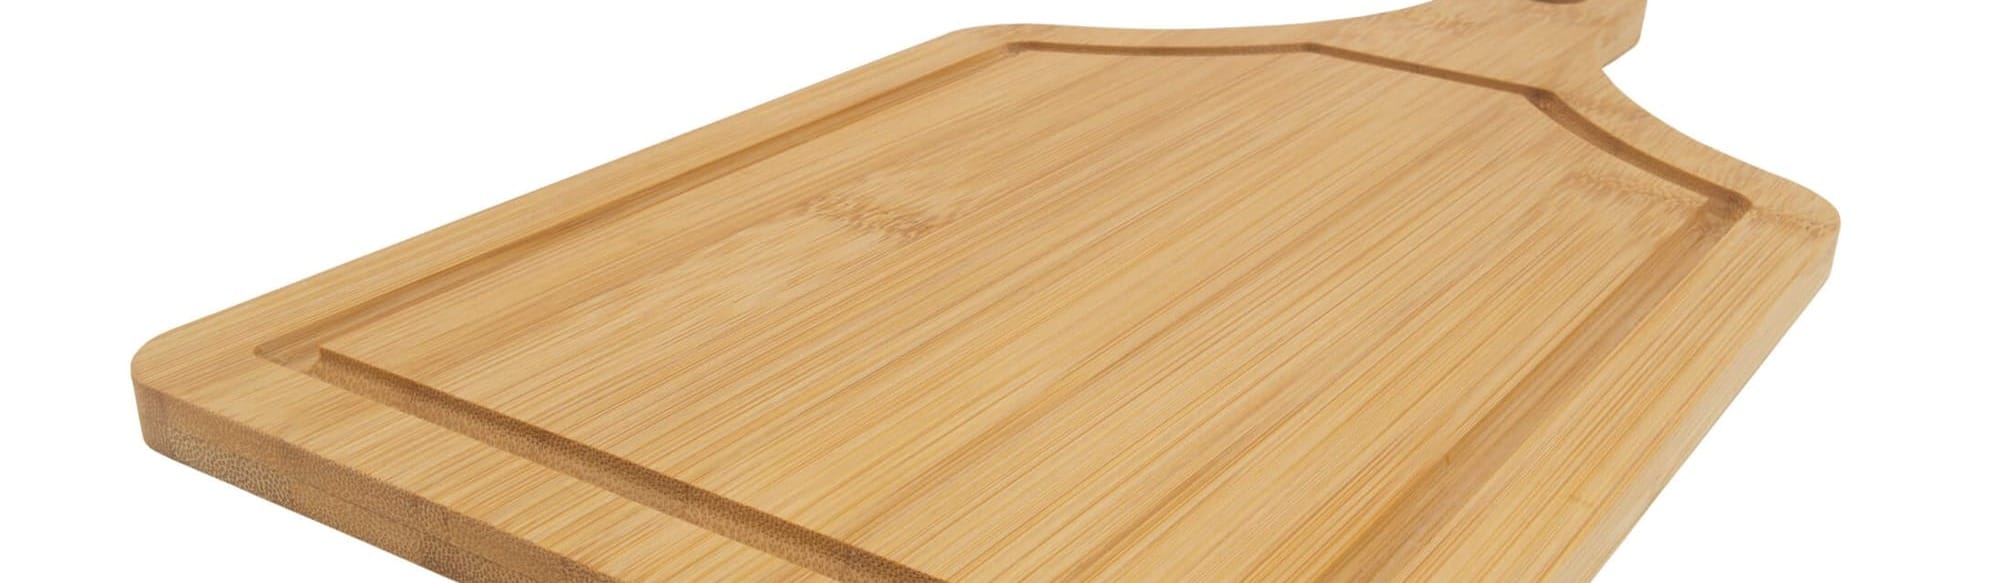 Sustainable Choices: Eco Bamboo Cutting Boards